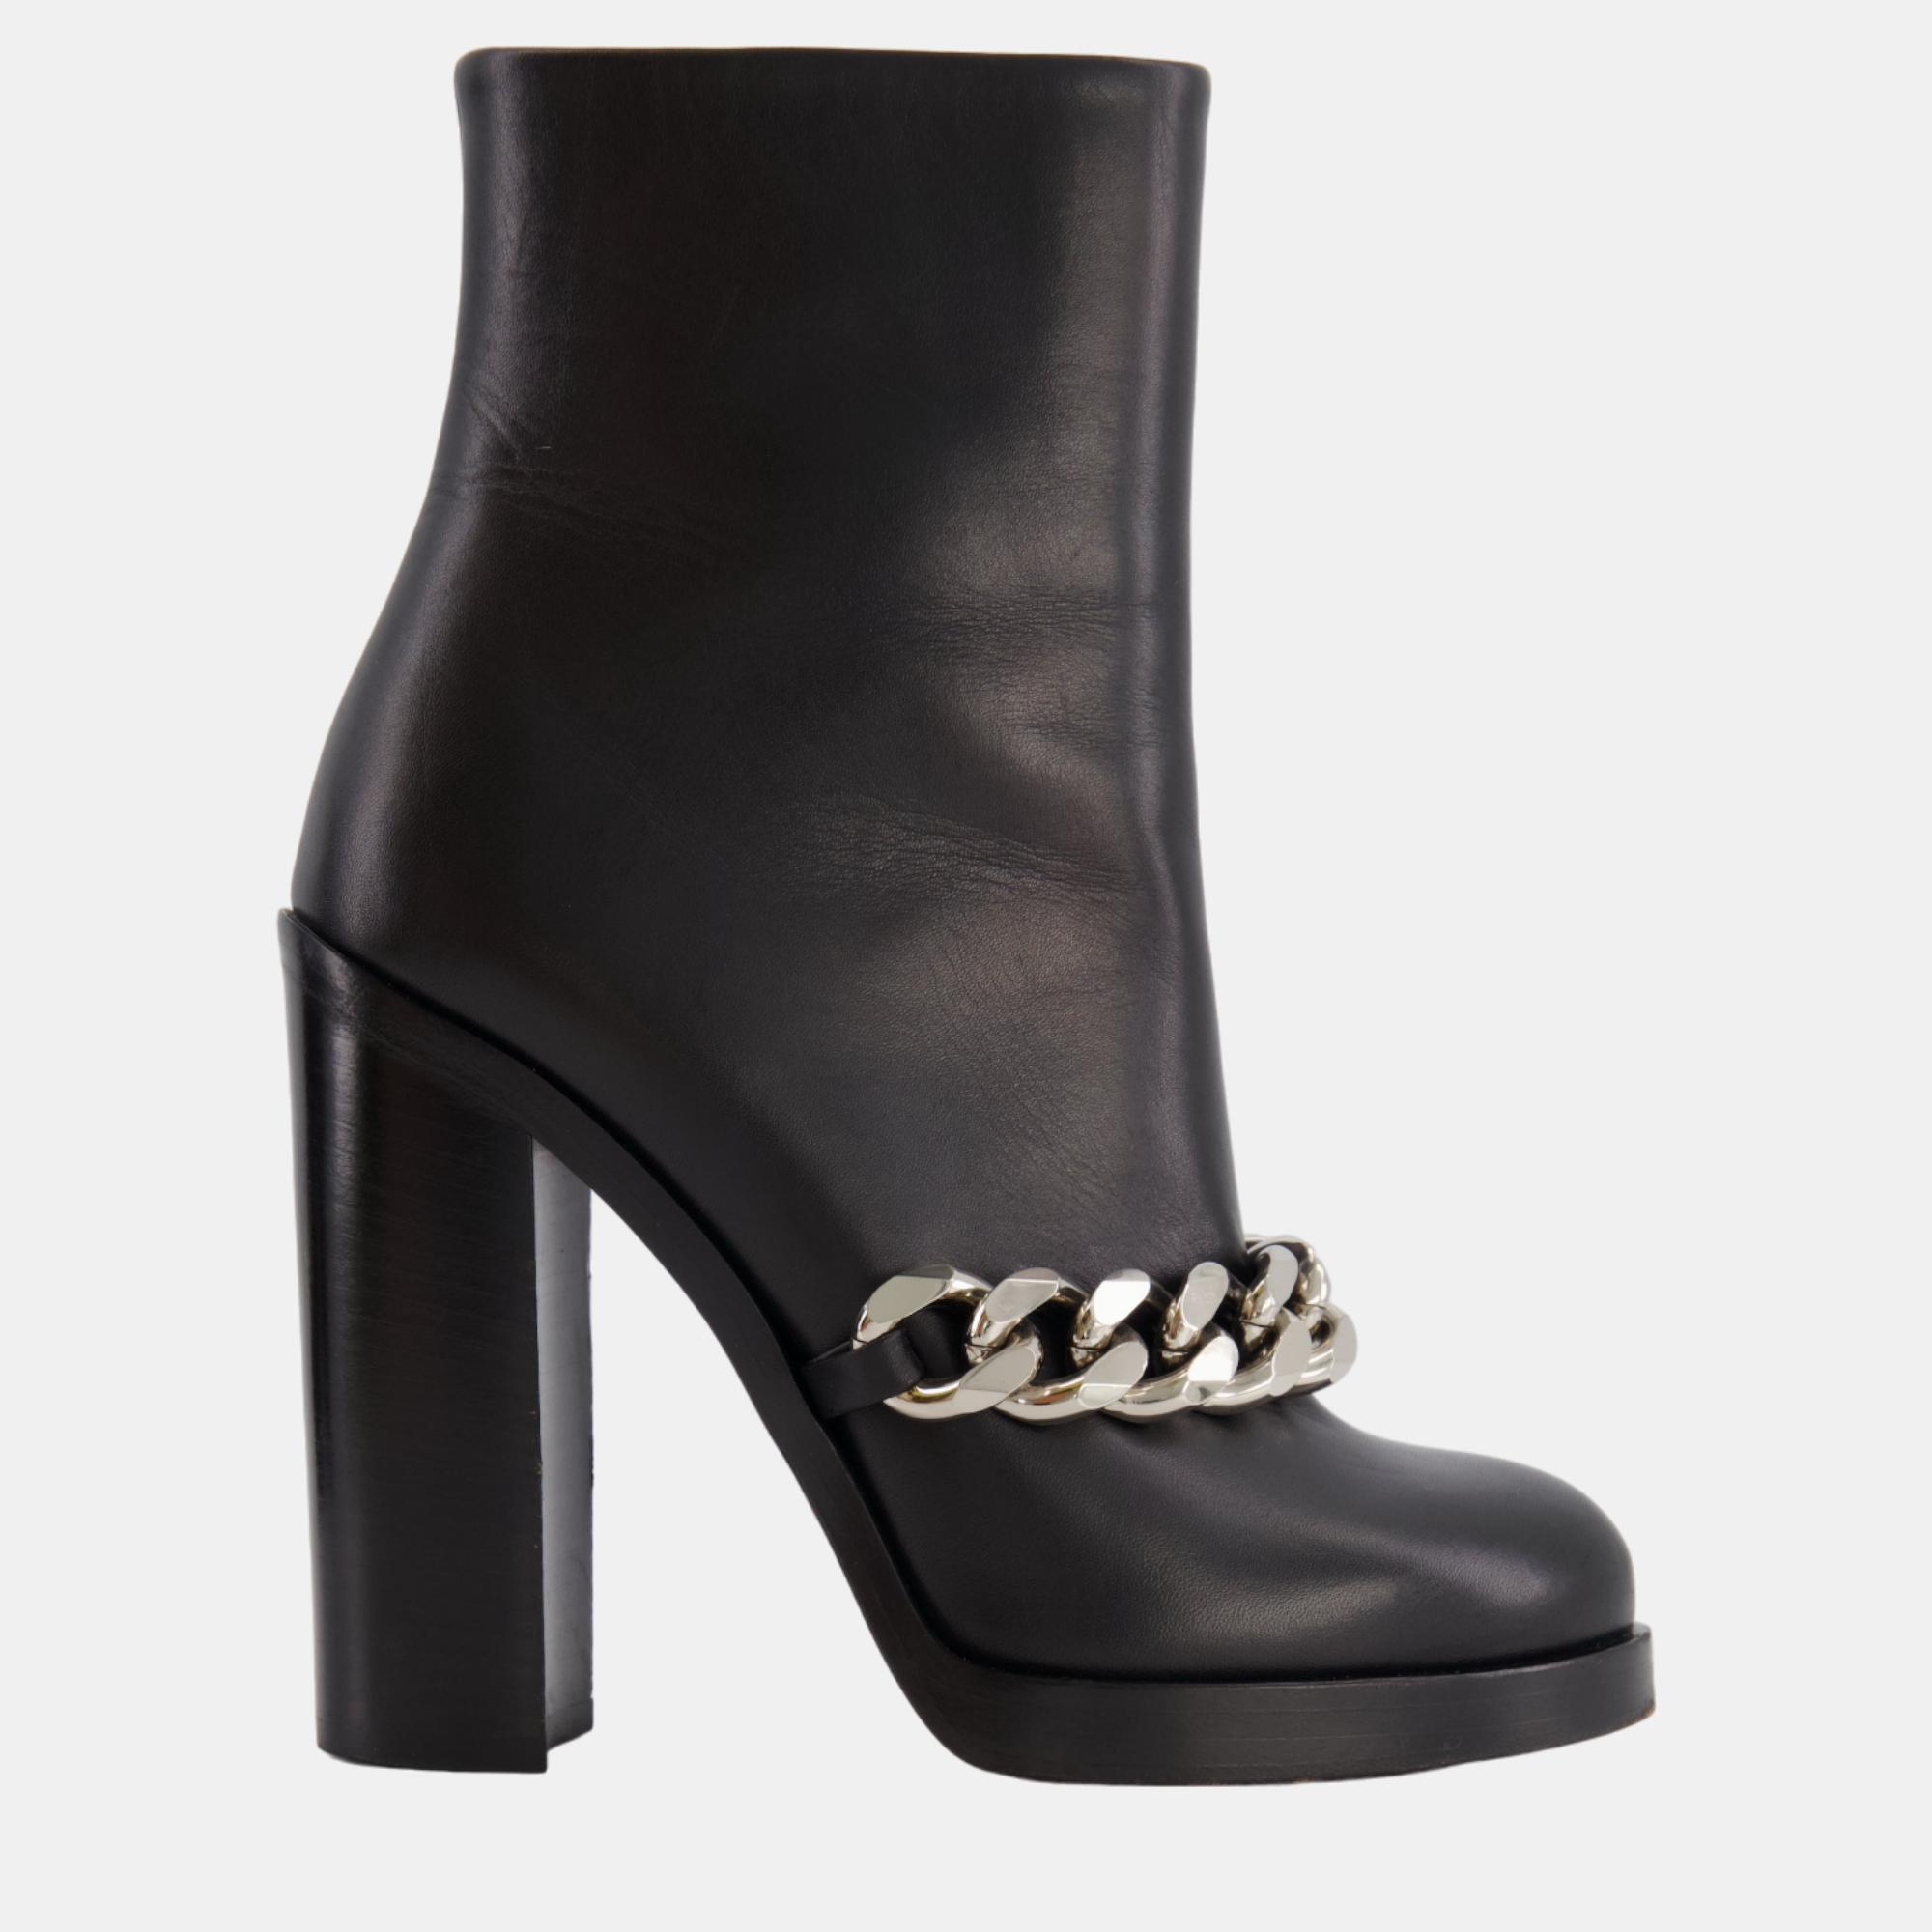 

Givenchy Black Leather Heeled Boots with Silver Chain Detail Size EU